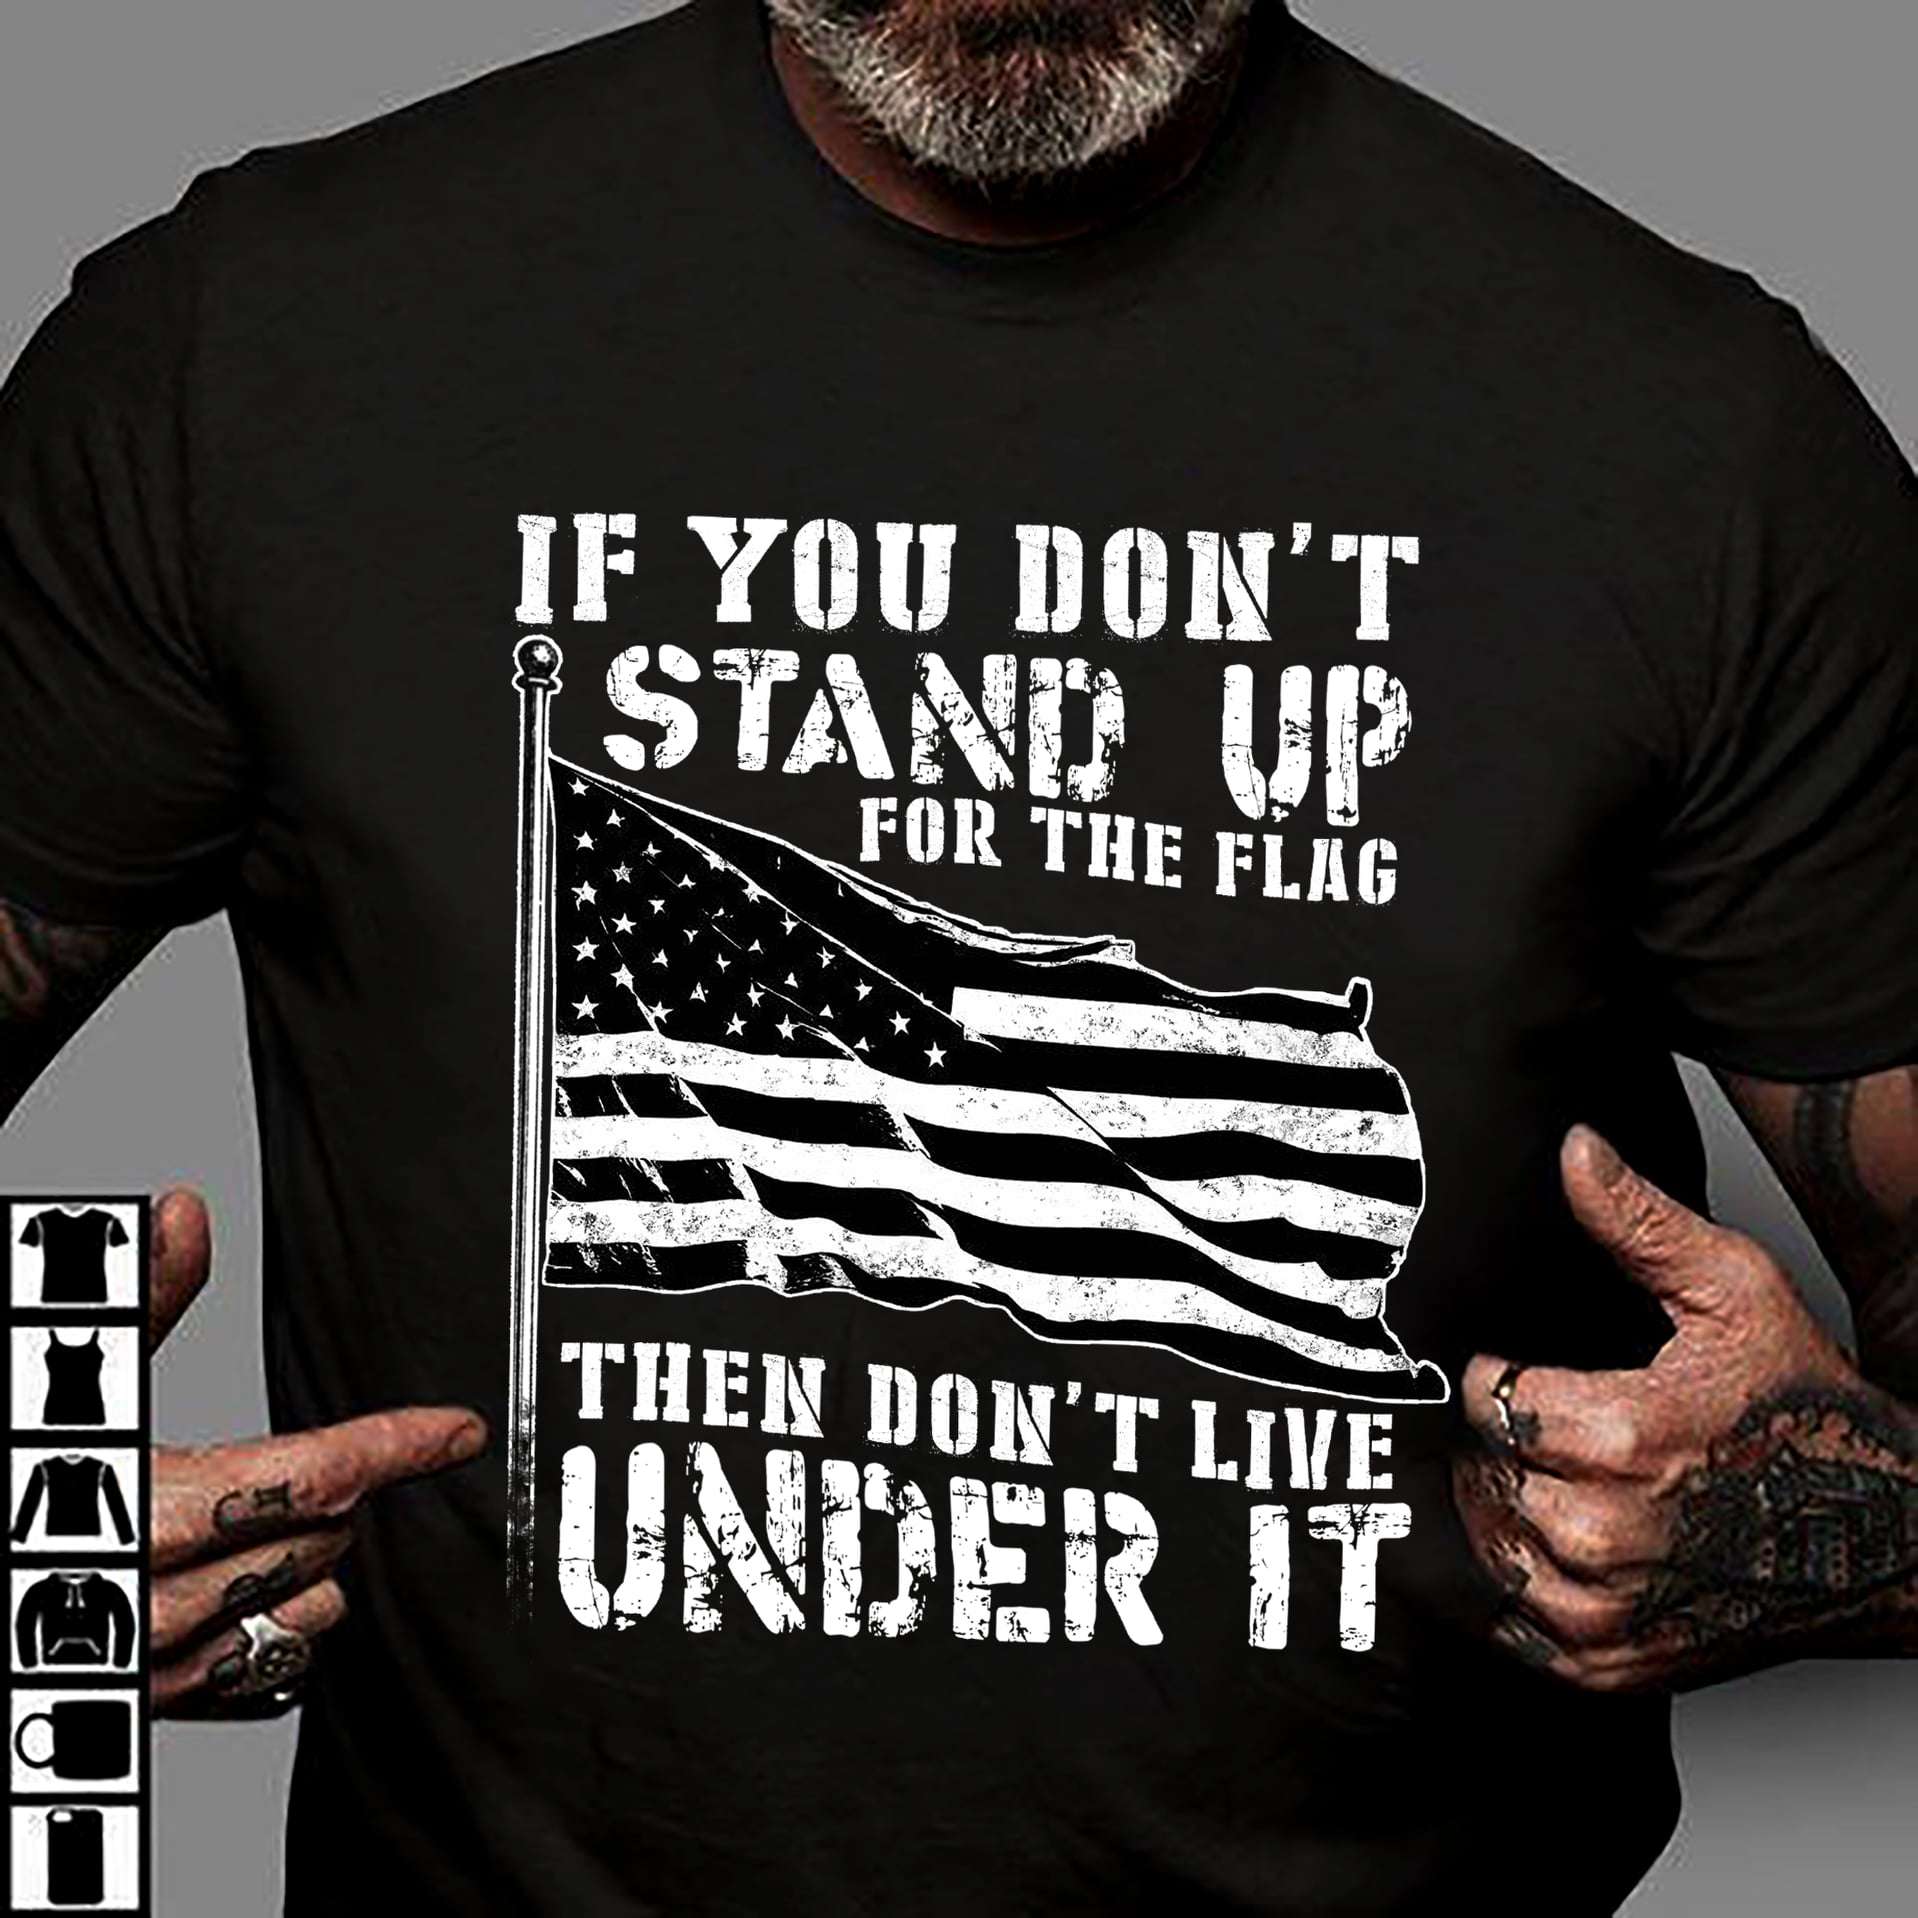 America Flag - If you don't stand up for the flag then don't live under it